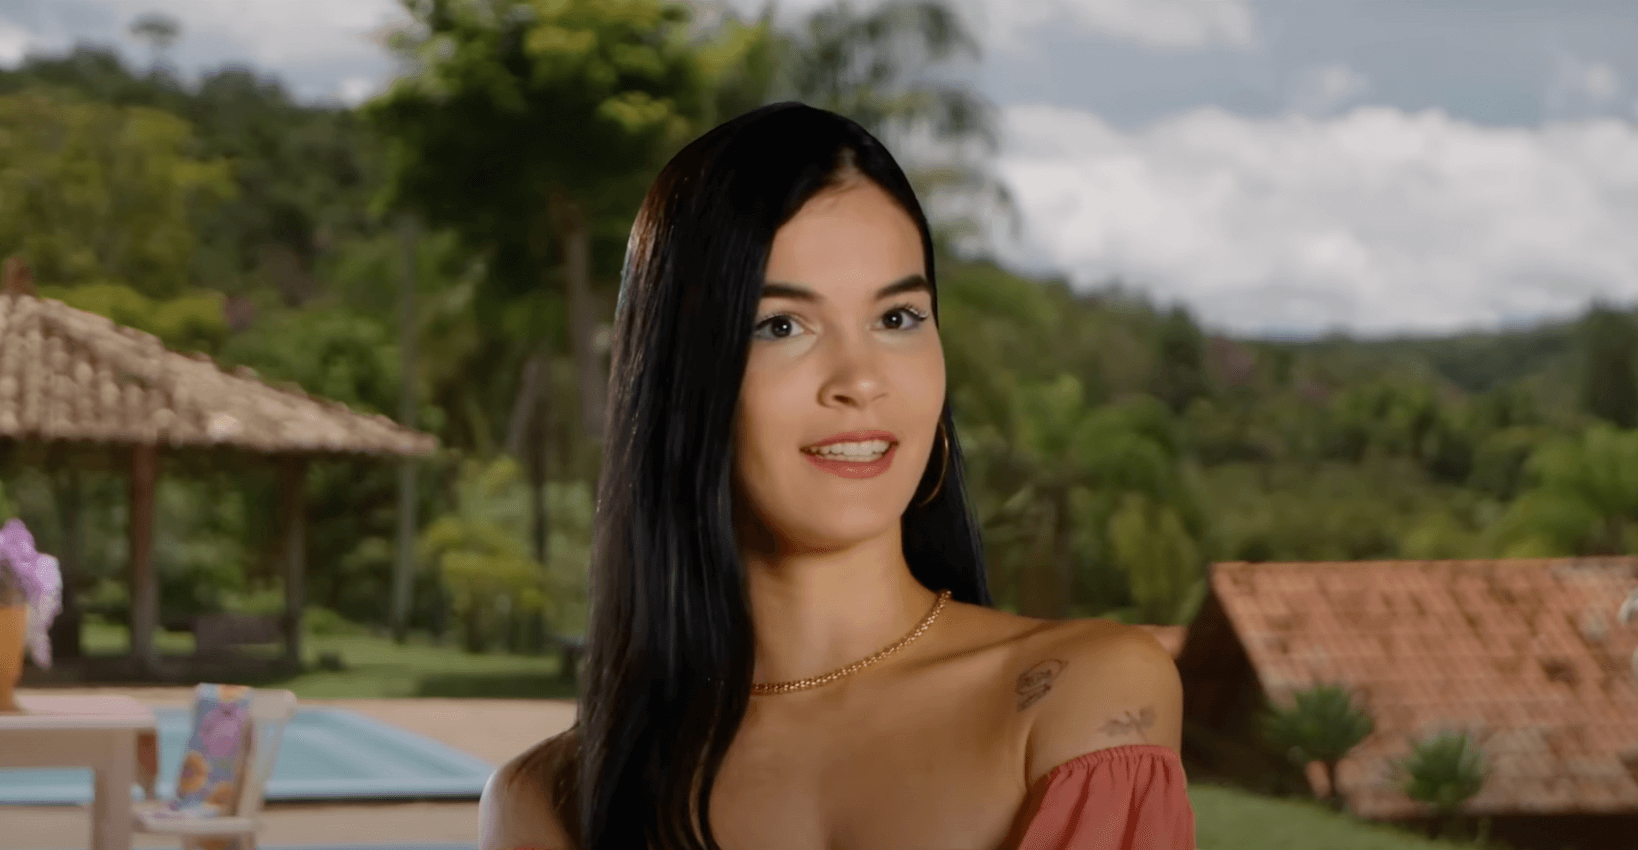 Ana from '90 Day Fiancé: Love in Paradise' Season 3 against a tropical background